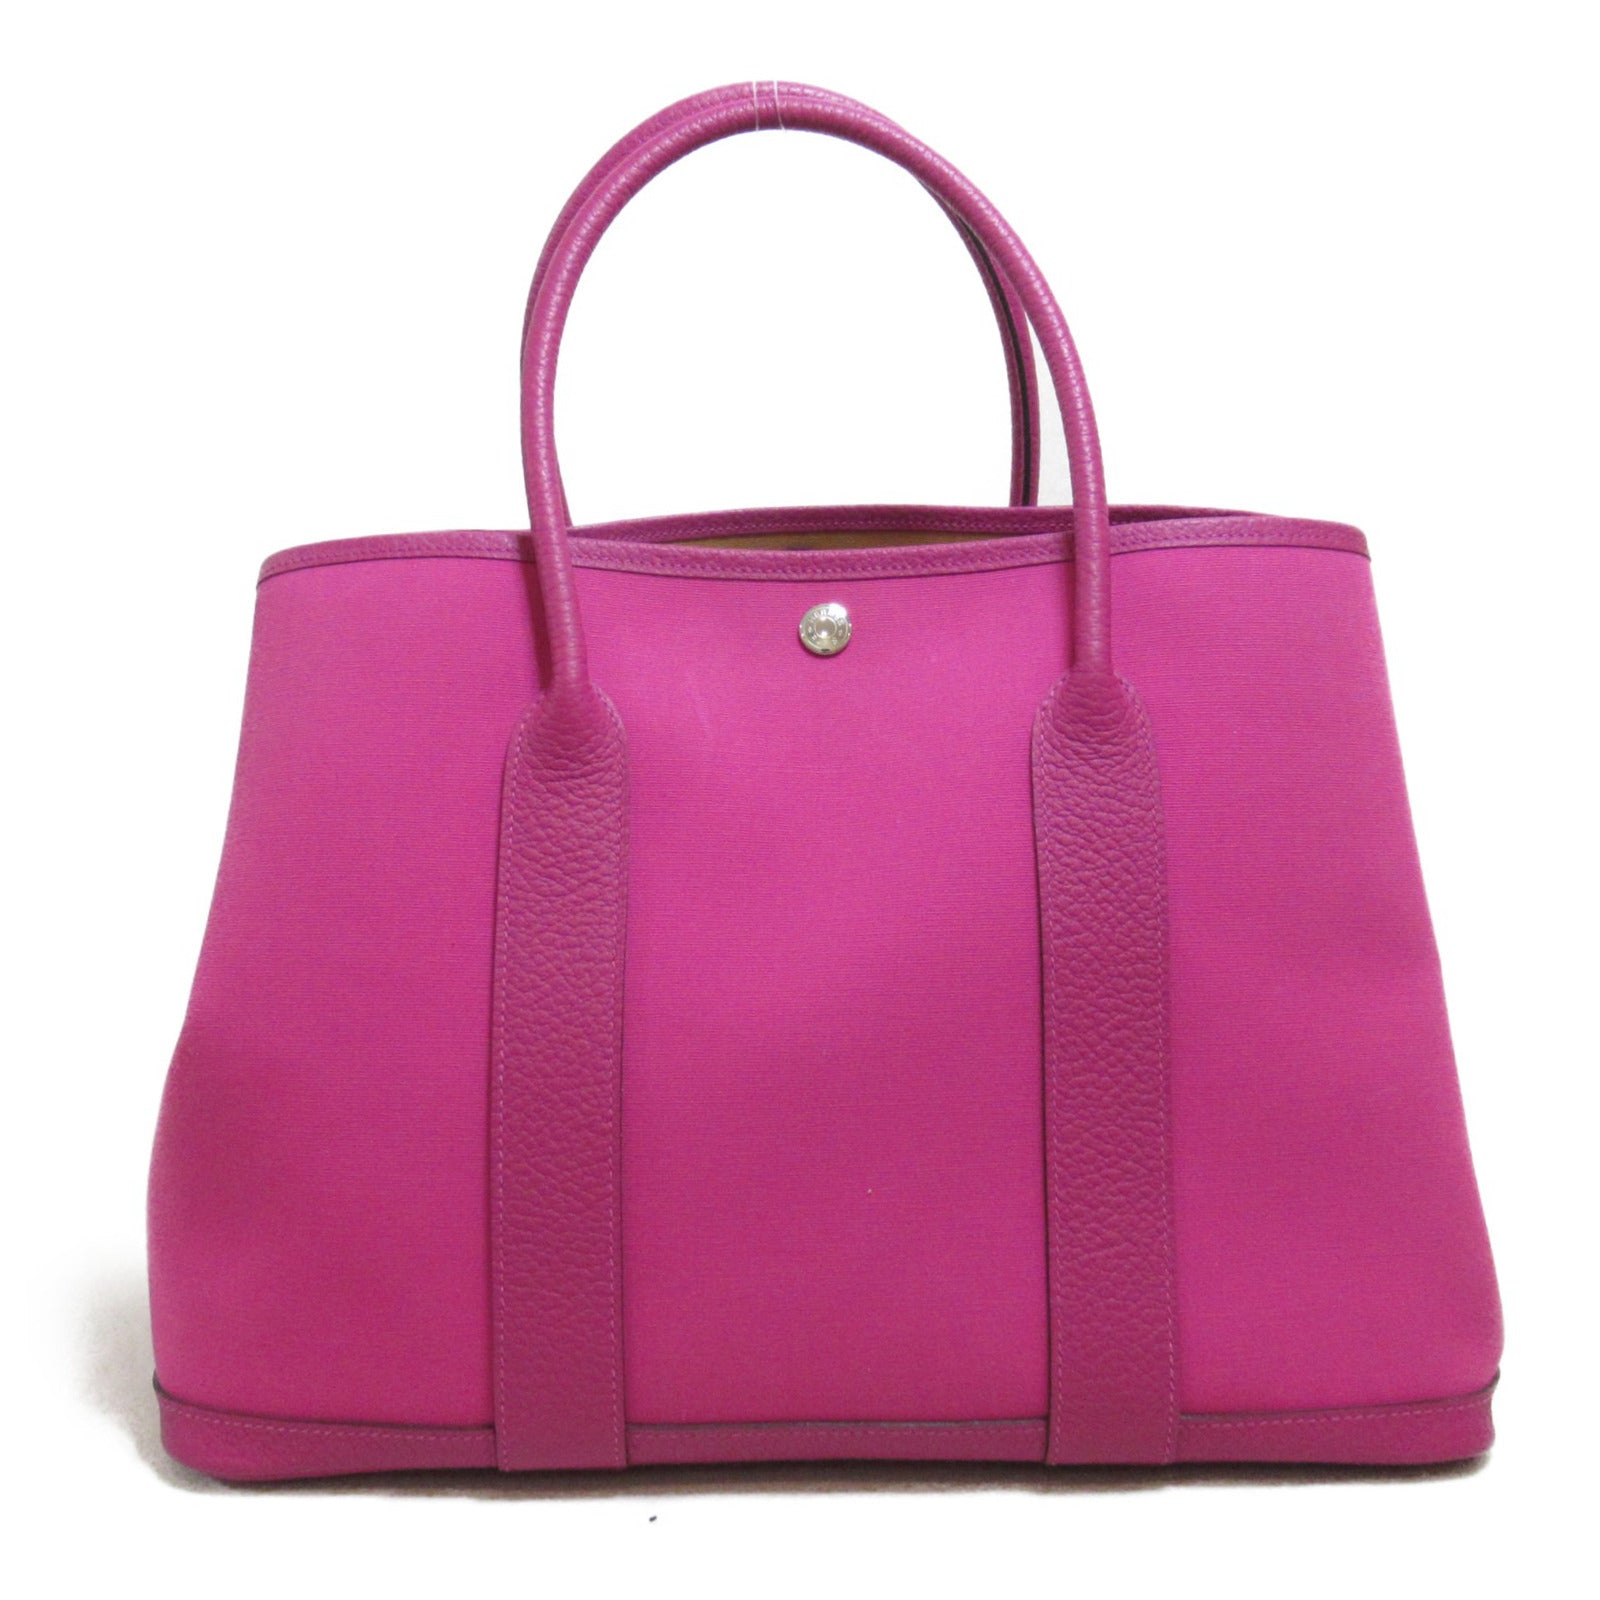 Hermes Hermes Garden Party PM Tote Bag Tote Bag Leather  Ophidia  Pink Collection